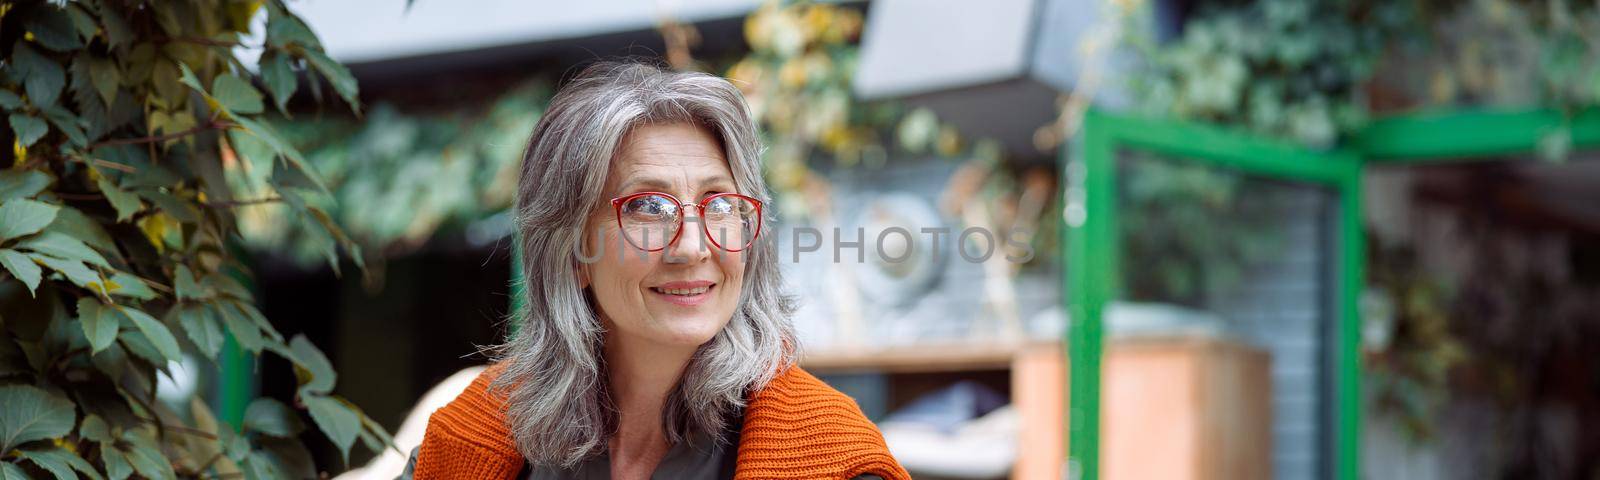 Happy silver haired mature woman with glasses eats dessert near cup of drink sitting at small table on outdoors cafe terrace on autumn day